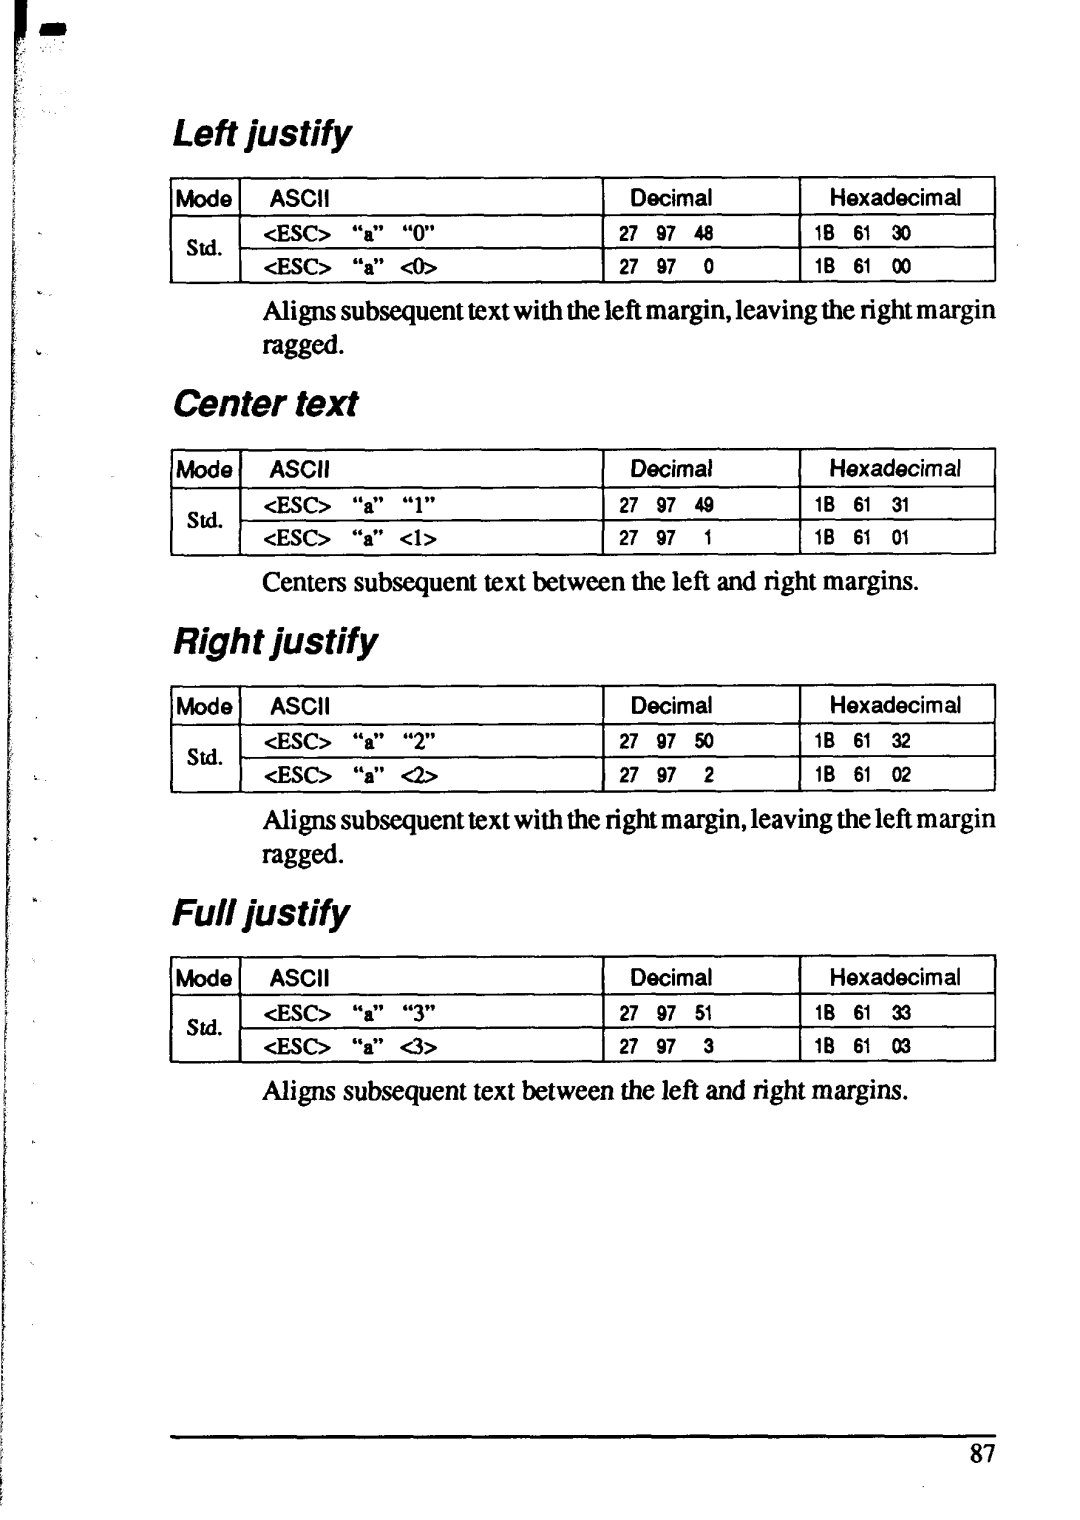 Star Micronics XR-1520, XR-1020 manual Left justify, Center text, Right justify, Full justify, Aligns subsequent 